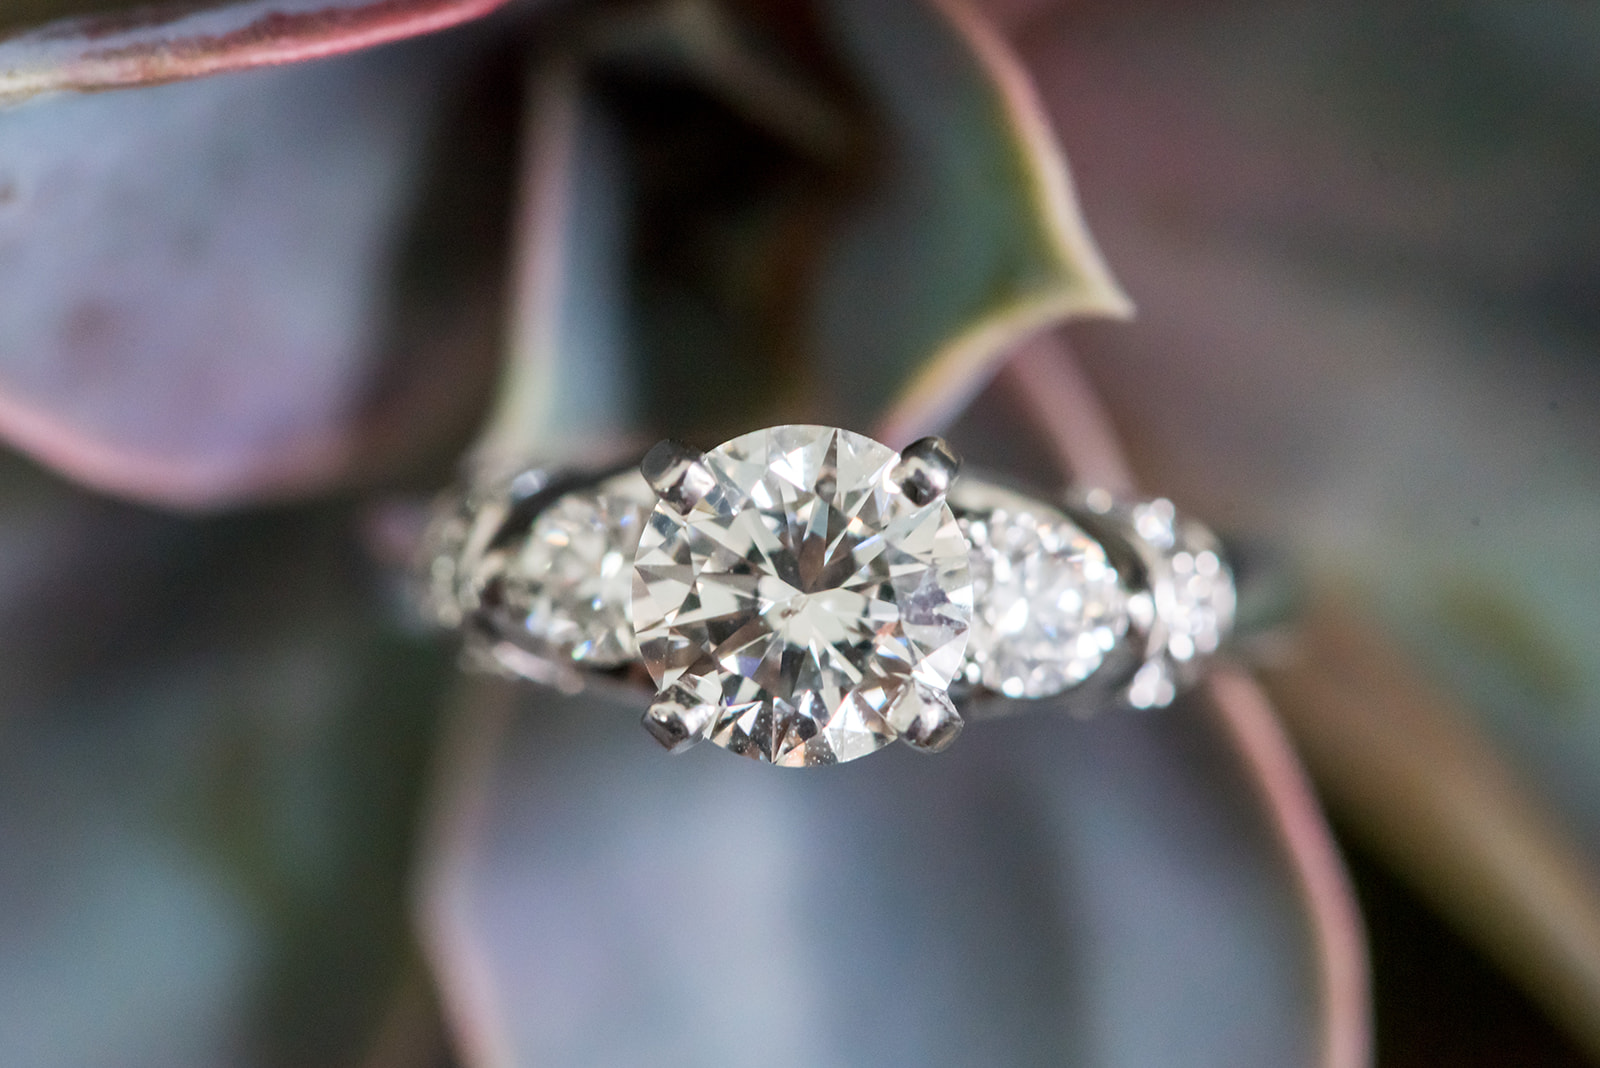 Details of a diamond engagement ring sitting on a plant